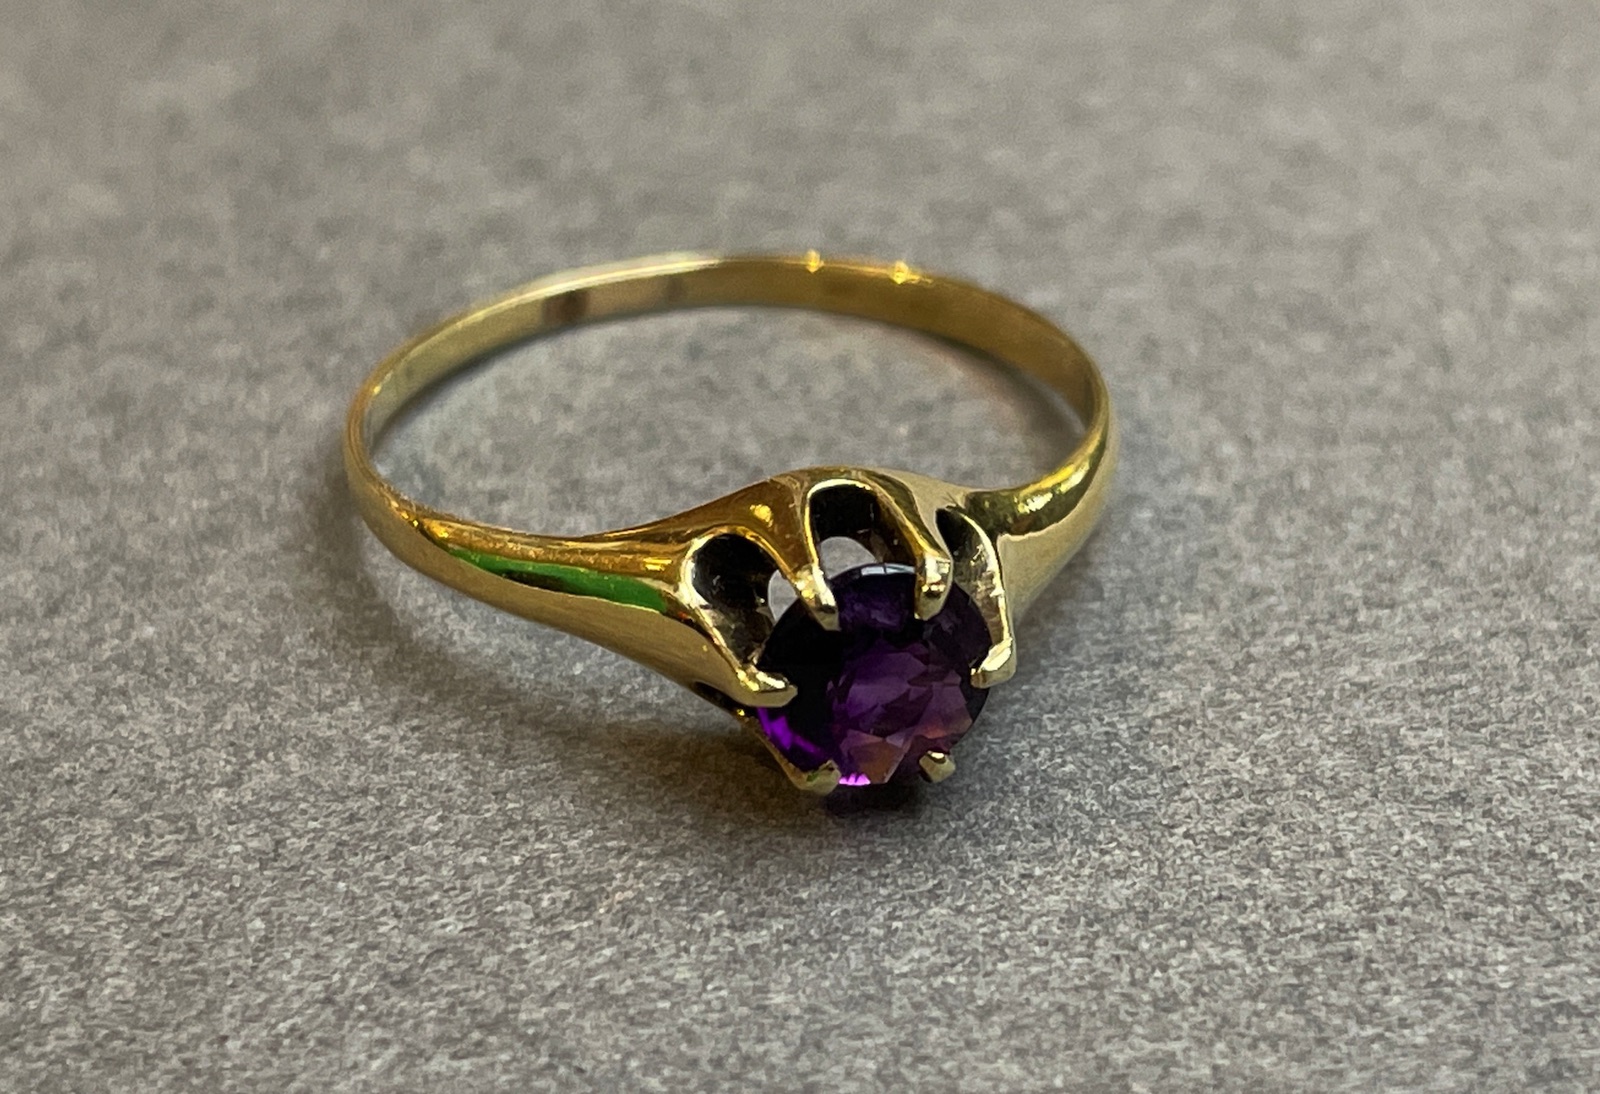 Stunning Deep Purple Amethyst Ring With Crystals